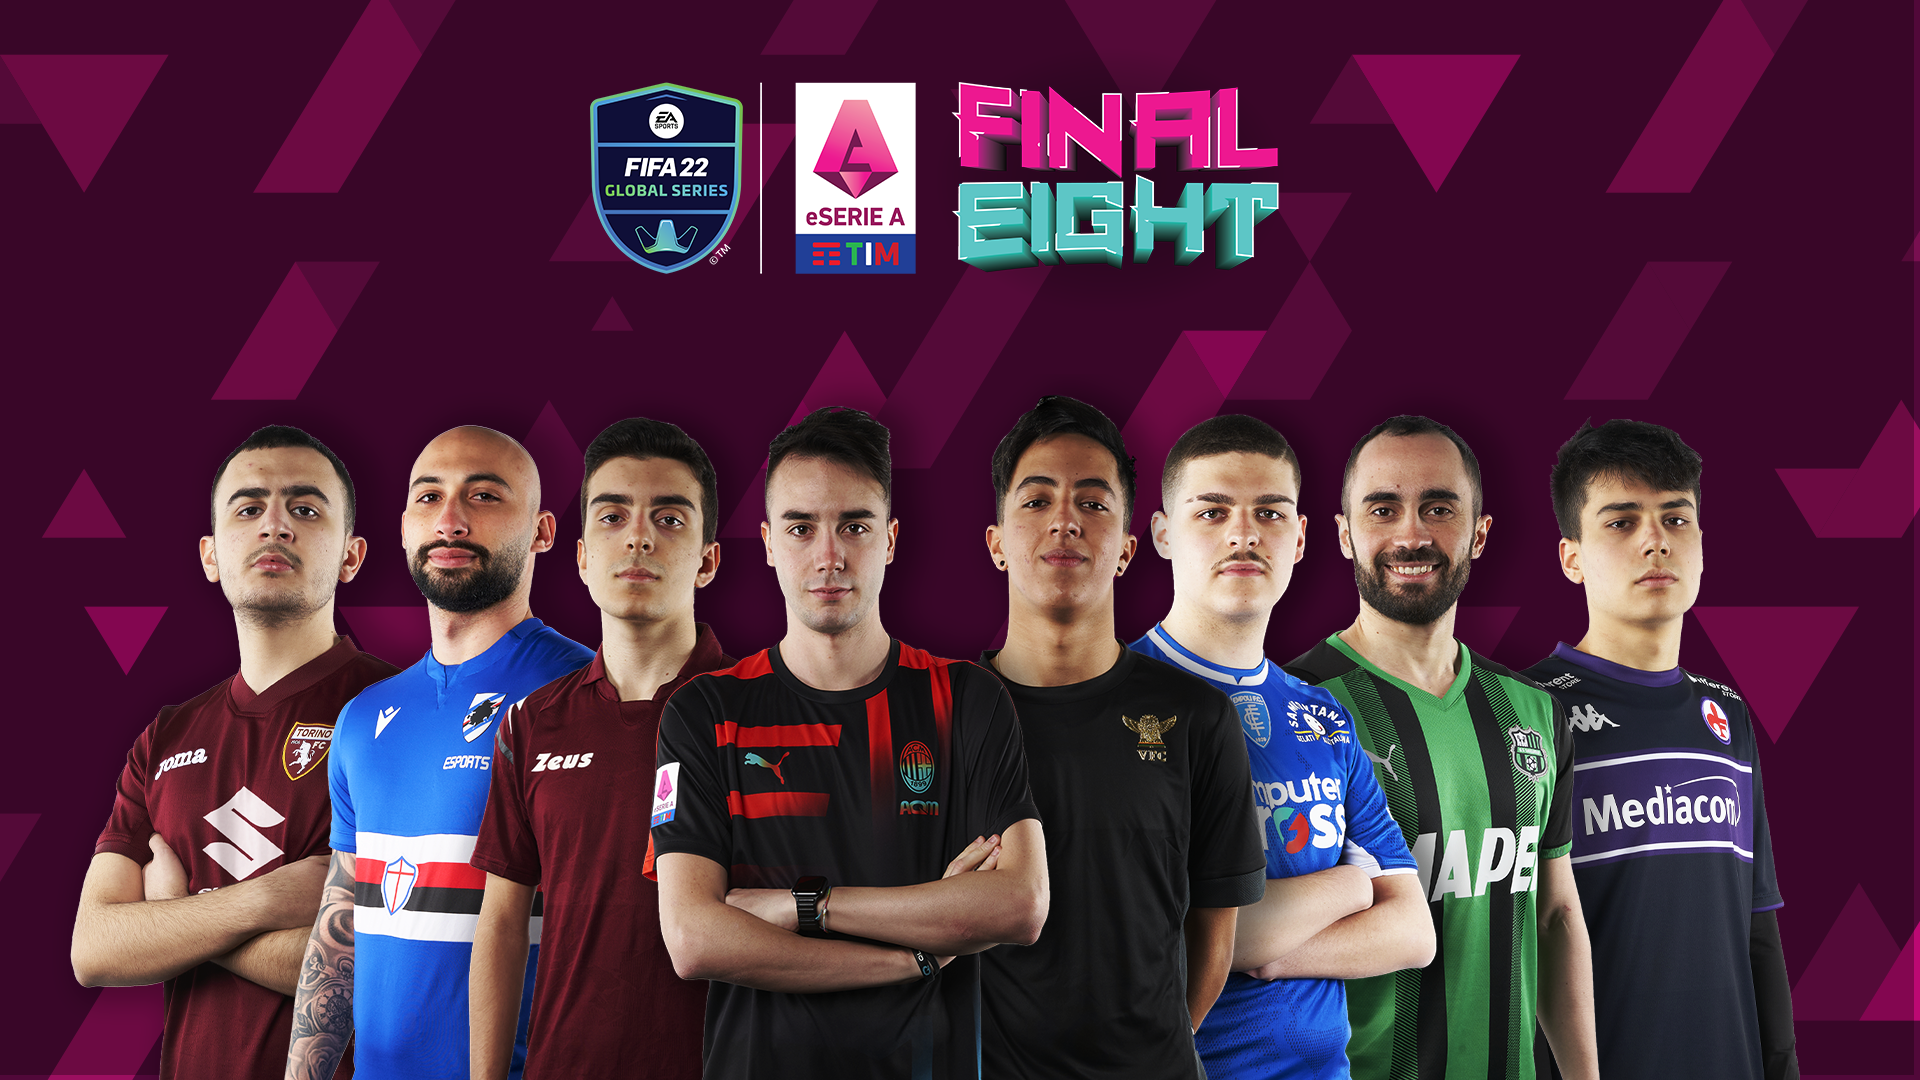 eSerie A TIM 2022 FIFA 22 final phase teams, players, prize money and how to watch matches Goal